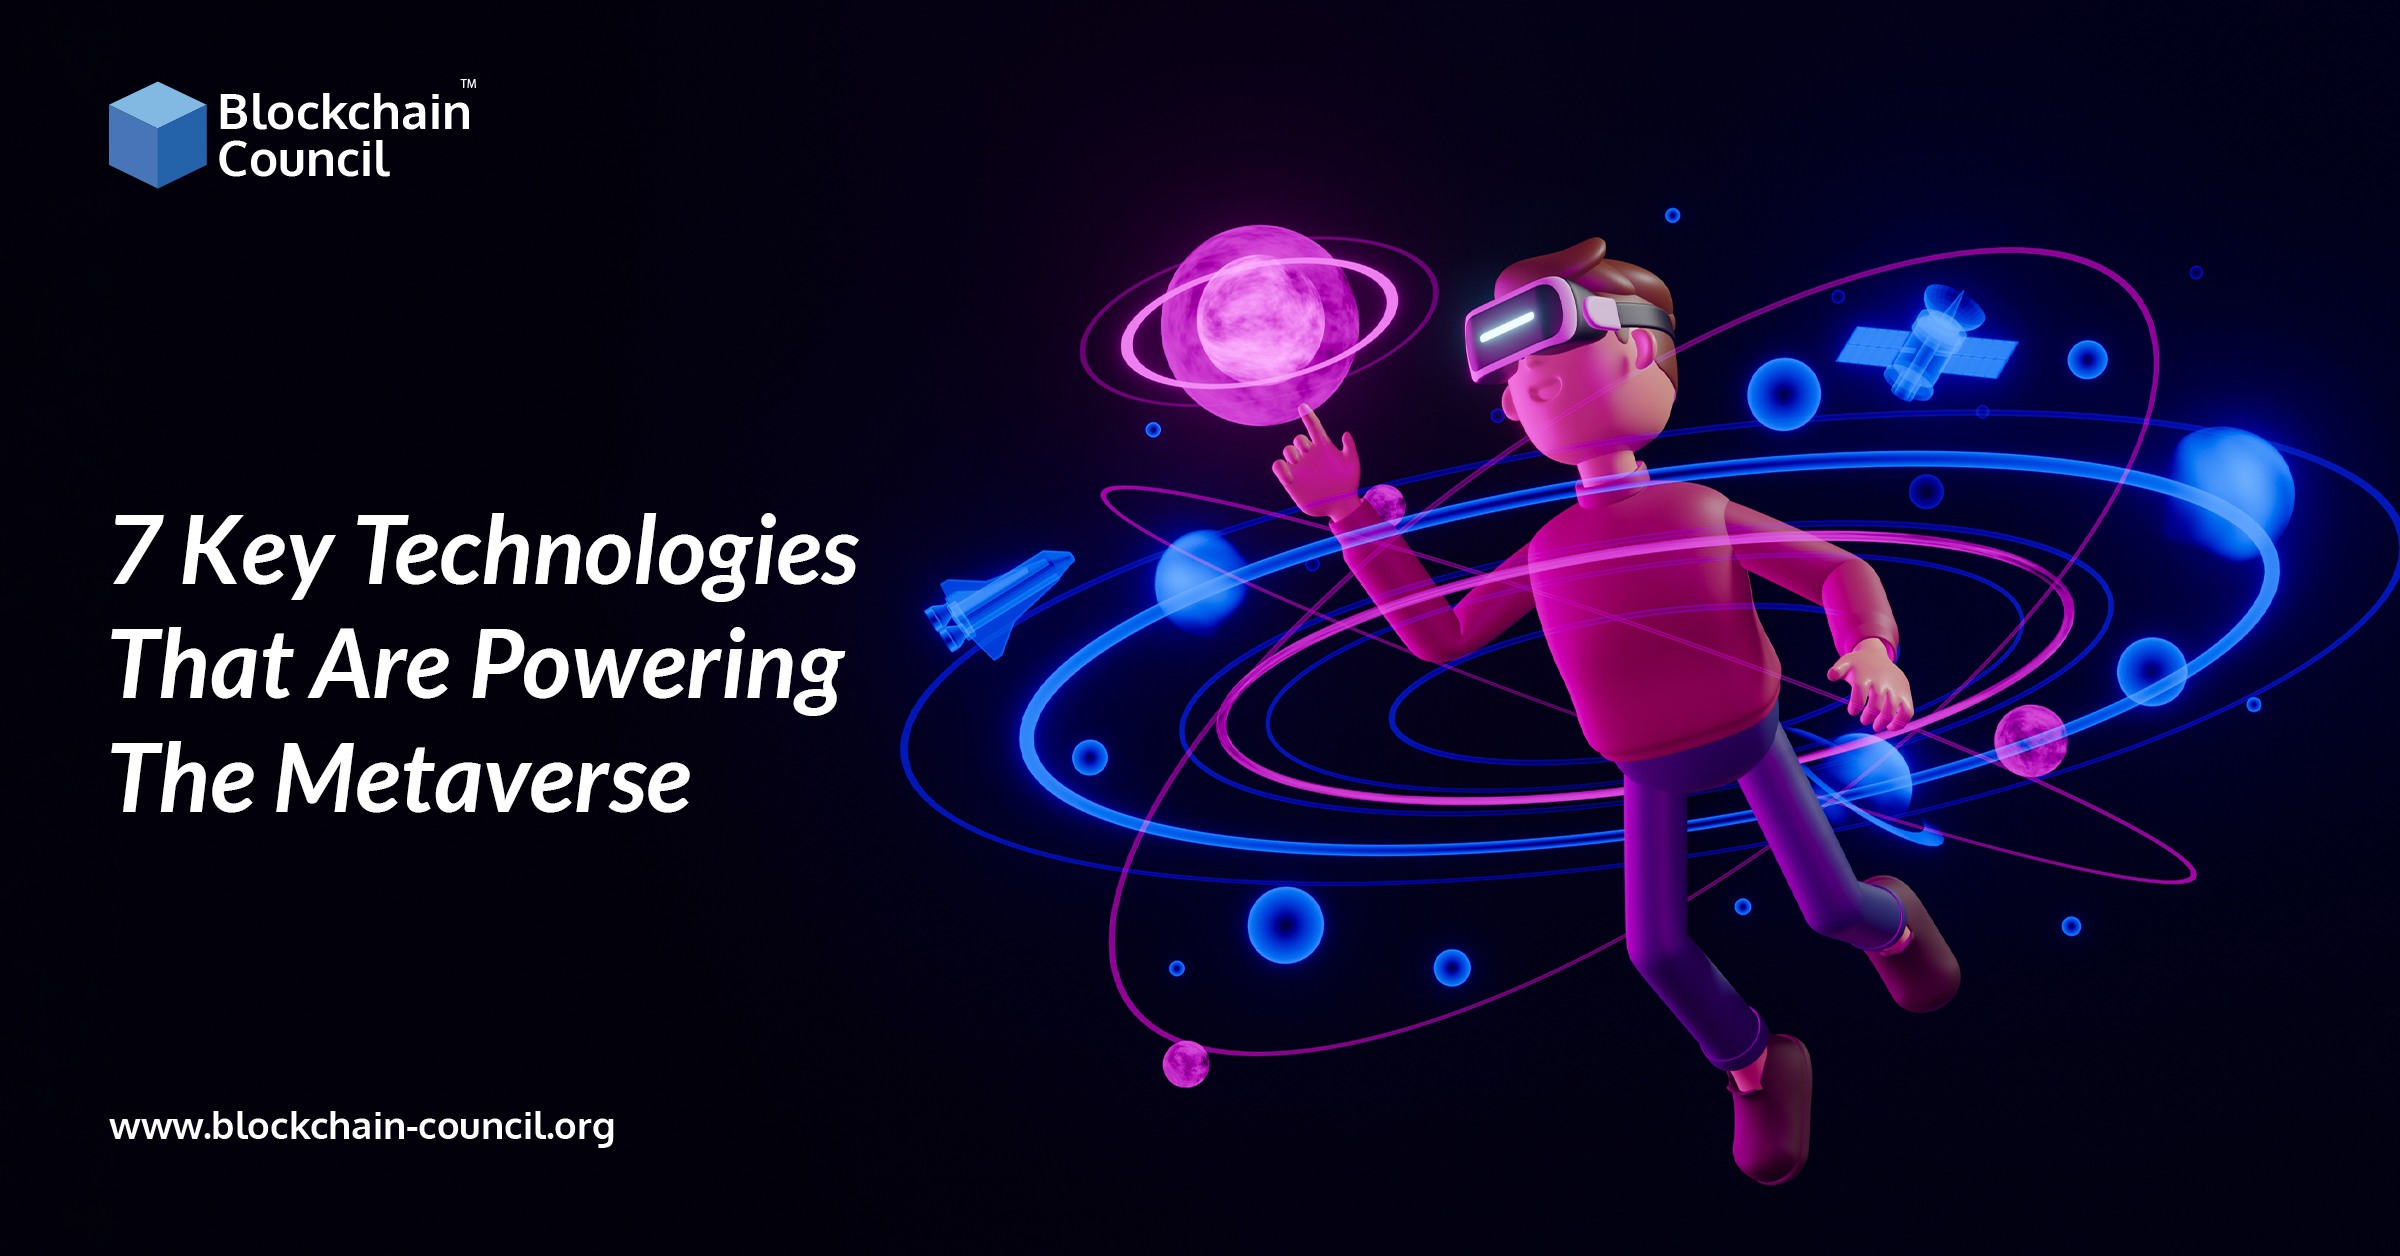 7 Key Technologies That Are Powering The Metaverse